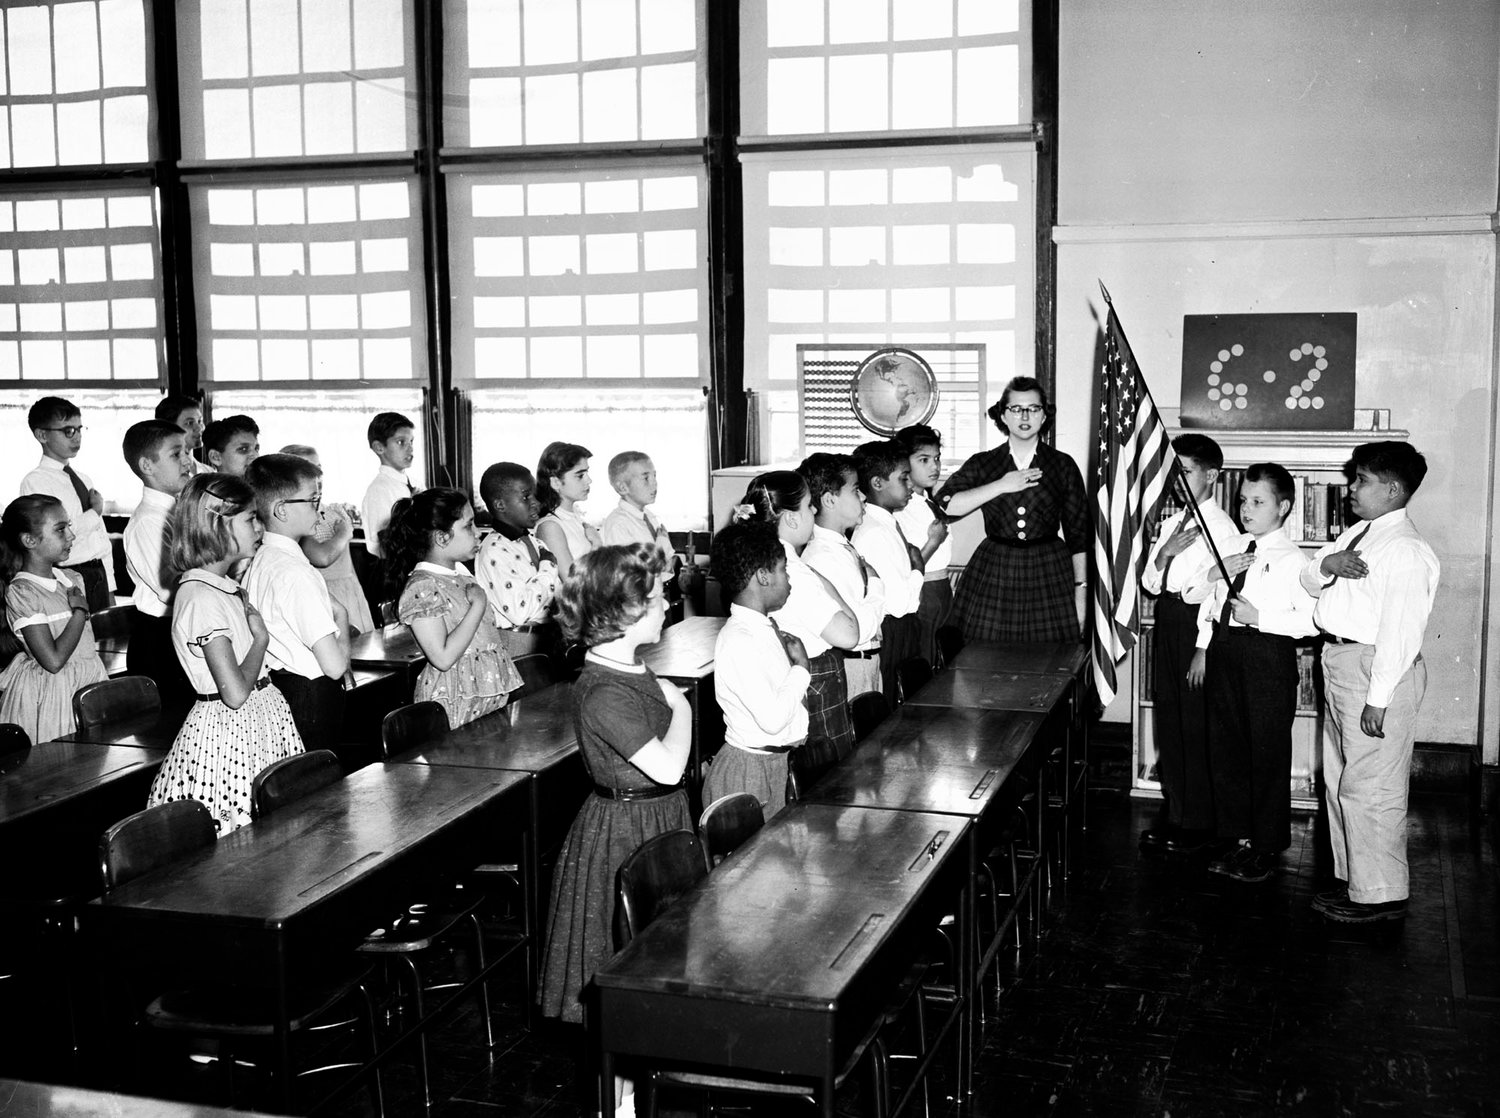 Students in Miss O'Harra's sixth-grade class at P.S. 116 in Manhattan's Kips Bay neighborhood recite the Pledge of Allegiance on Oct. 11, 1957.